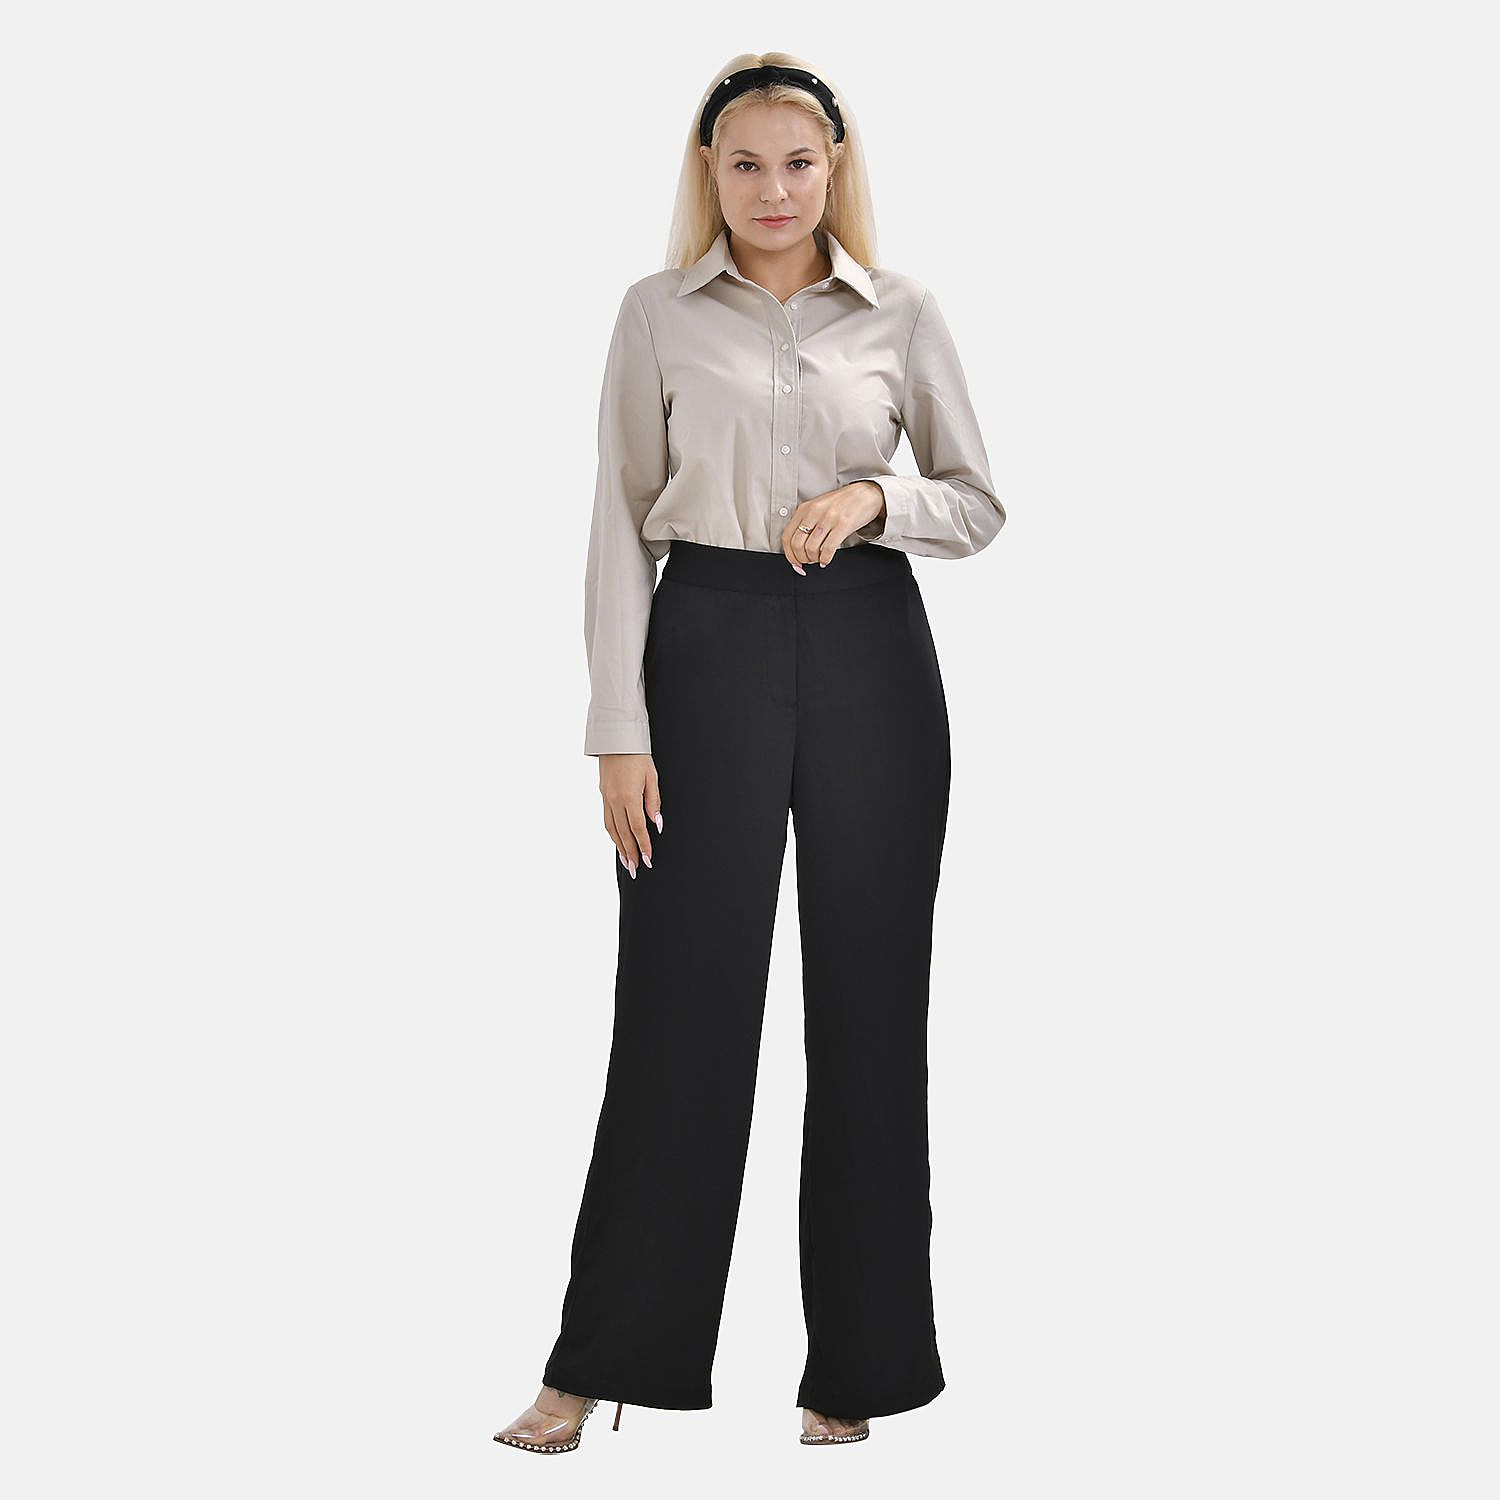 La-Marey-Polyester-Patterned-Jean-and-Pant-Trouser-Size-78x1-cm-Black-